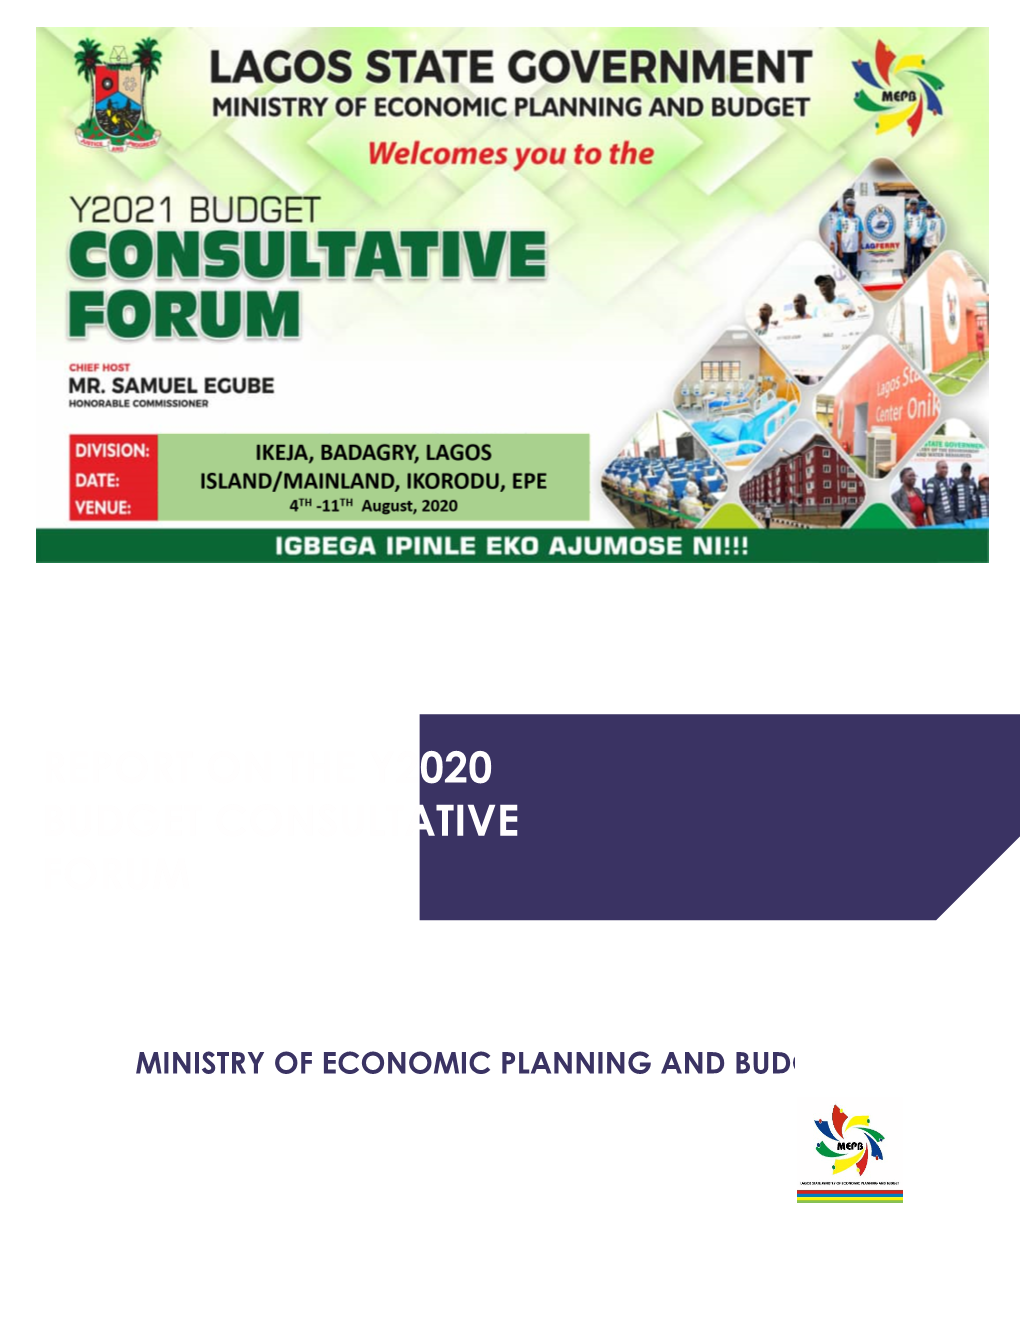 Report on the Y2020 Budget Consultative Forum